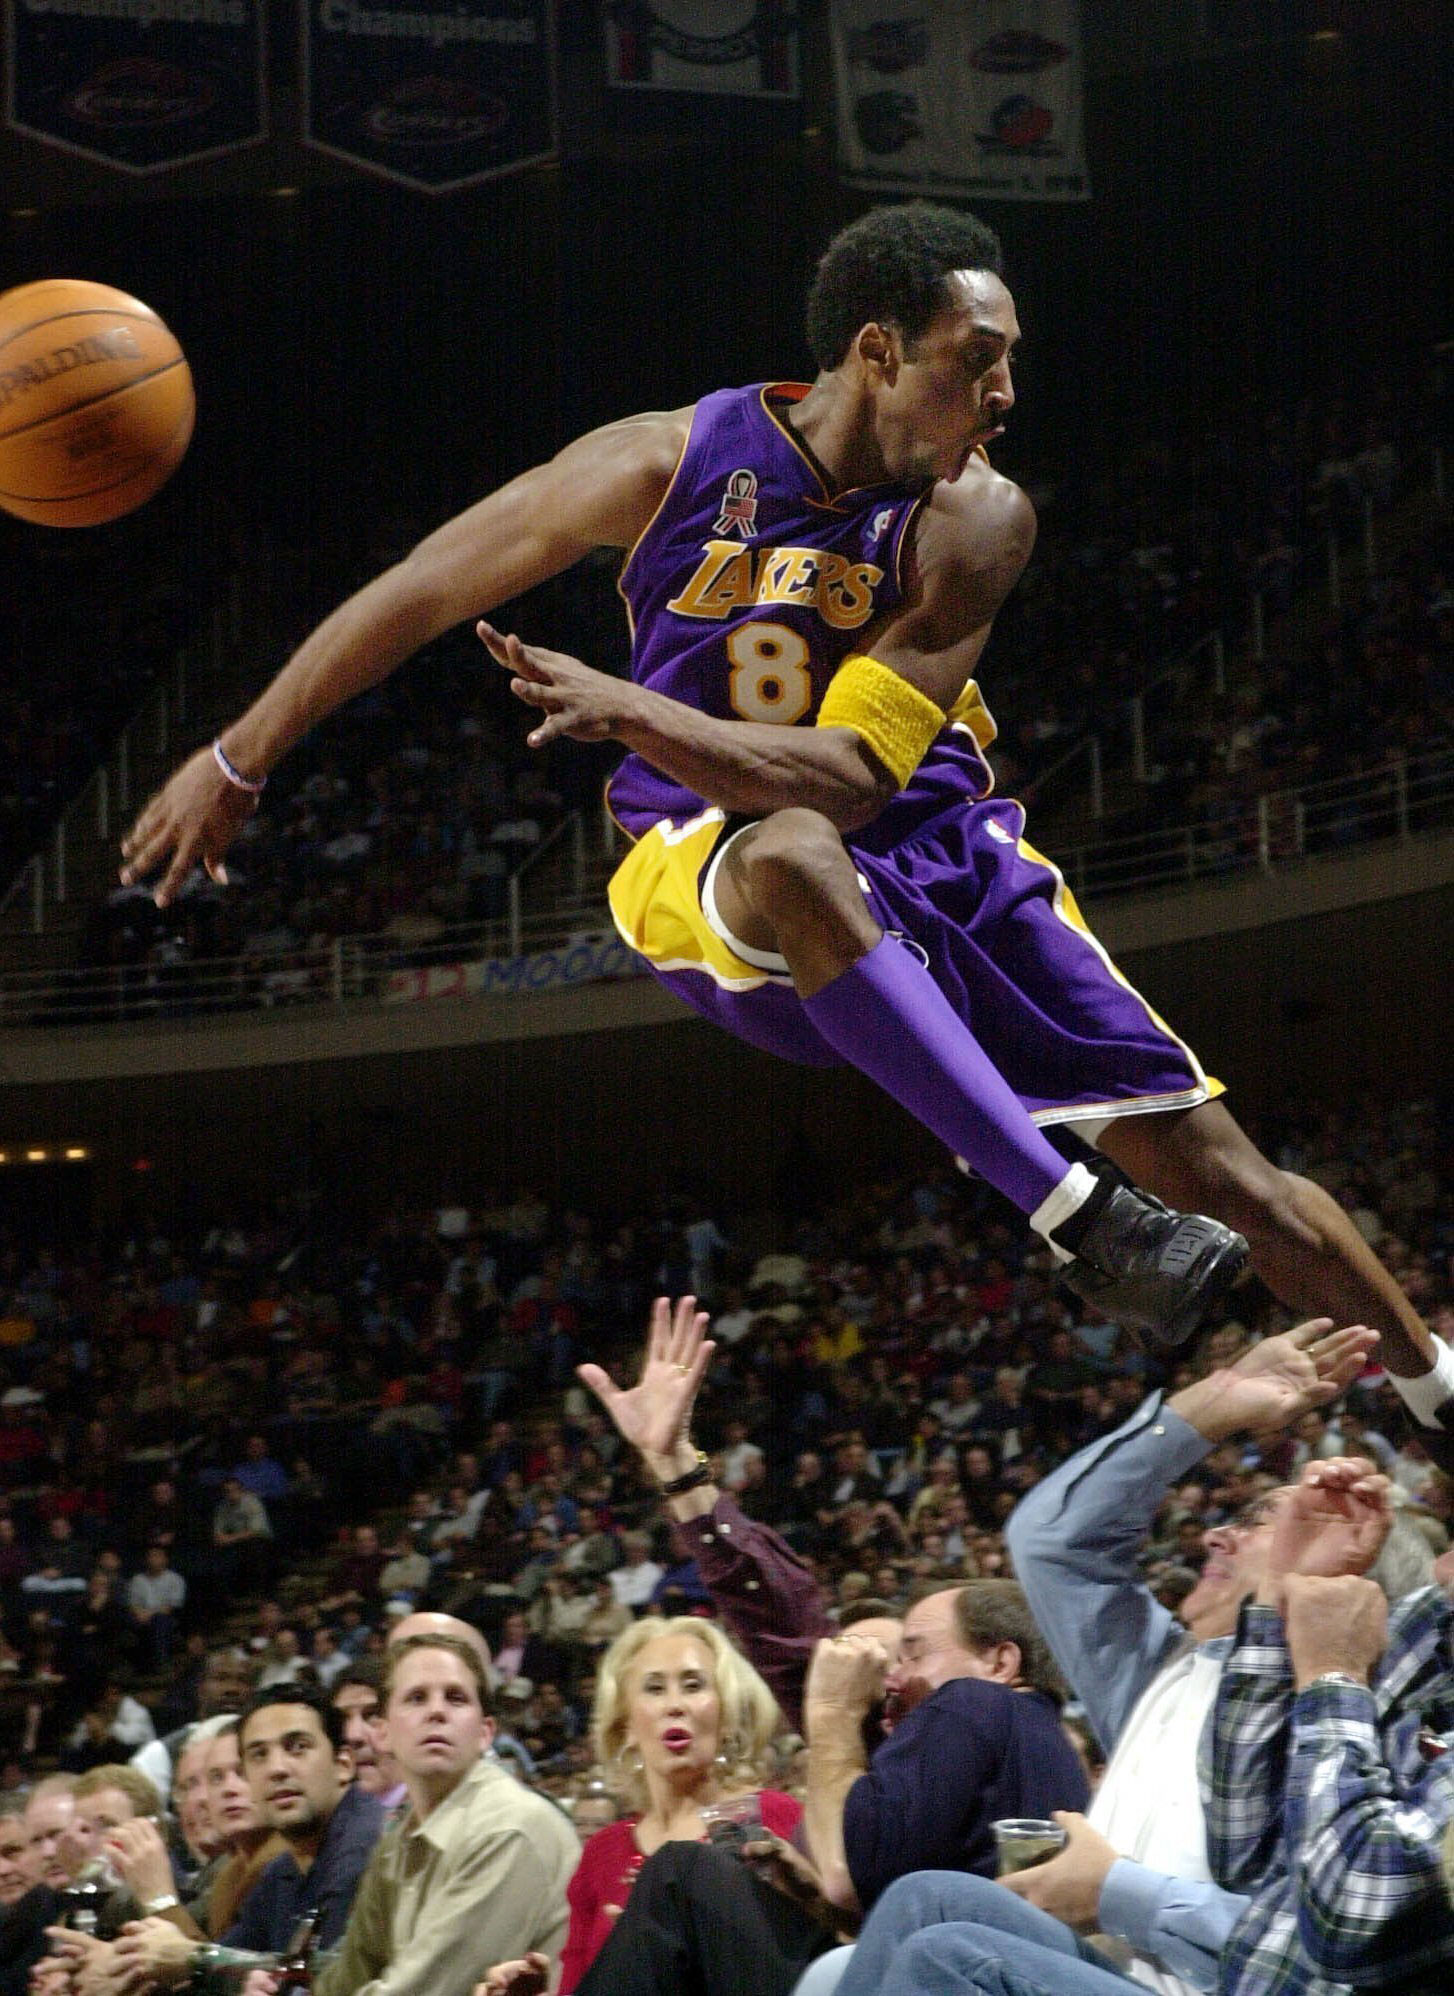 In this 2001 photo Los Angeles Lakers' Kobe Bryant jumps over a row of fans after saving the ball from going out of bounds.